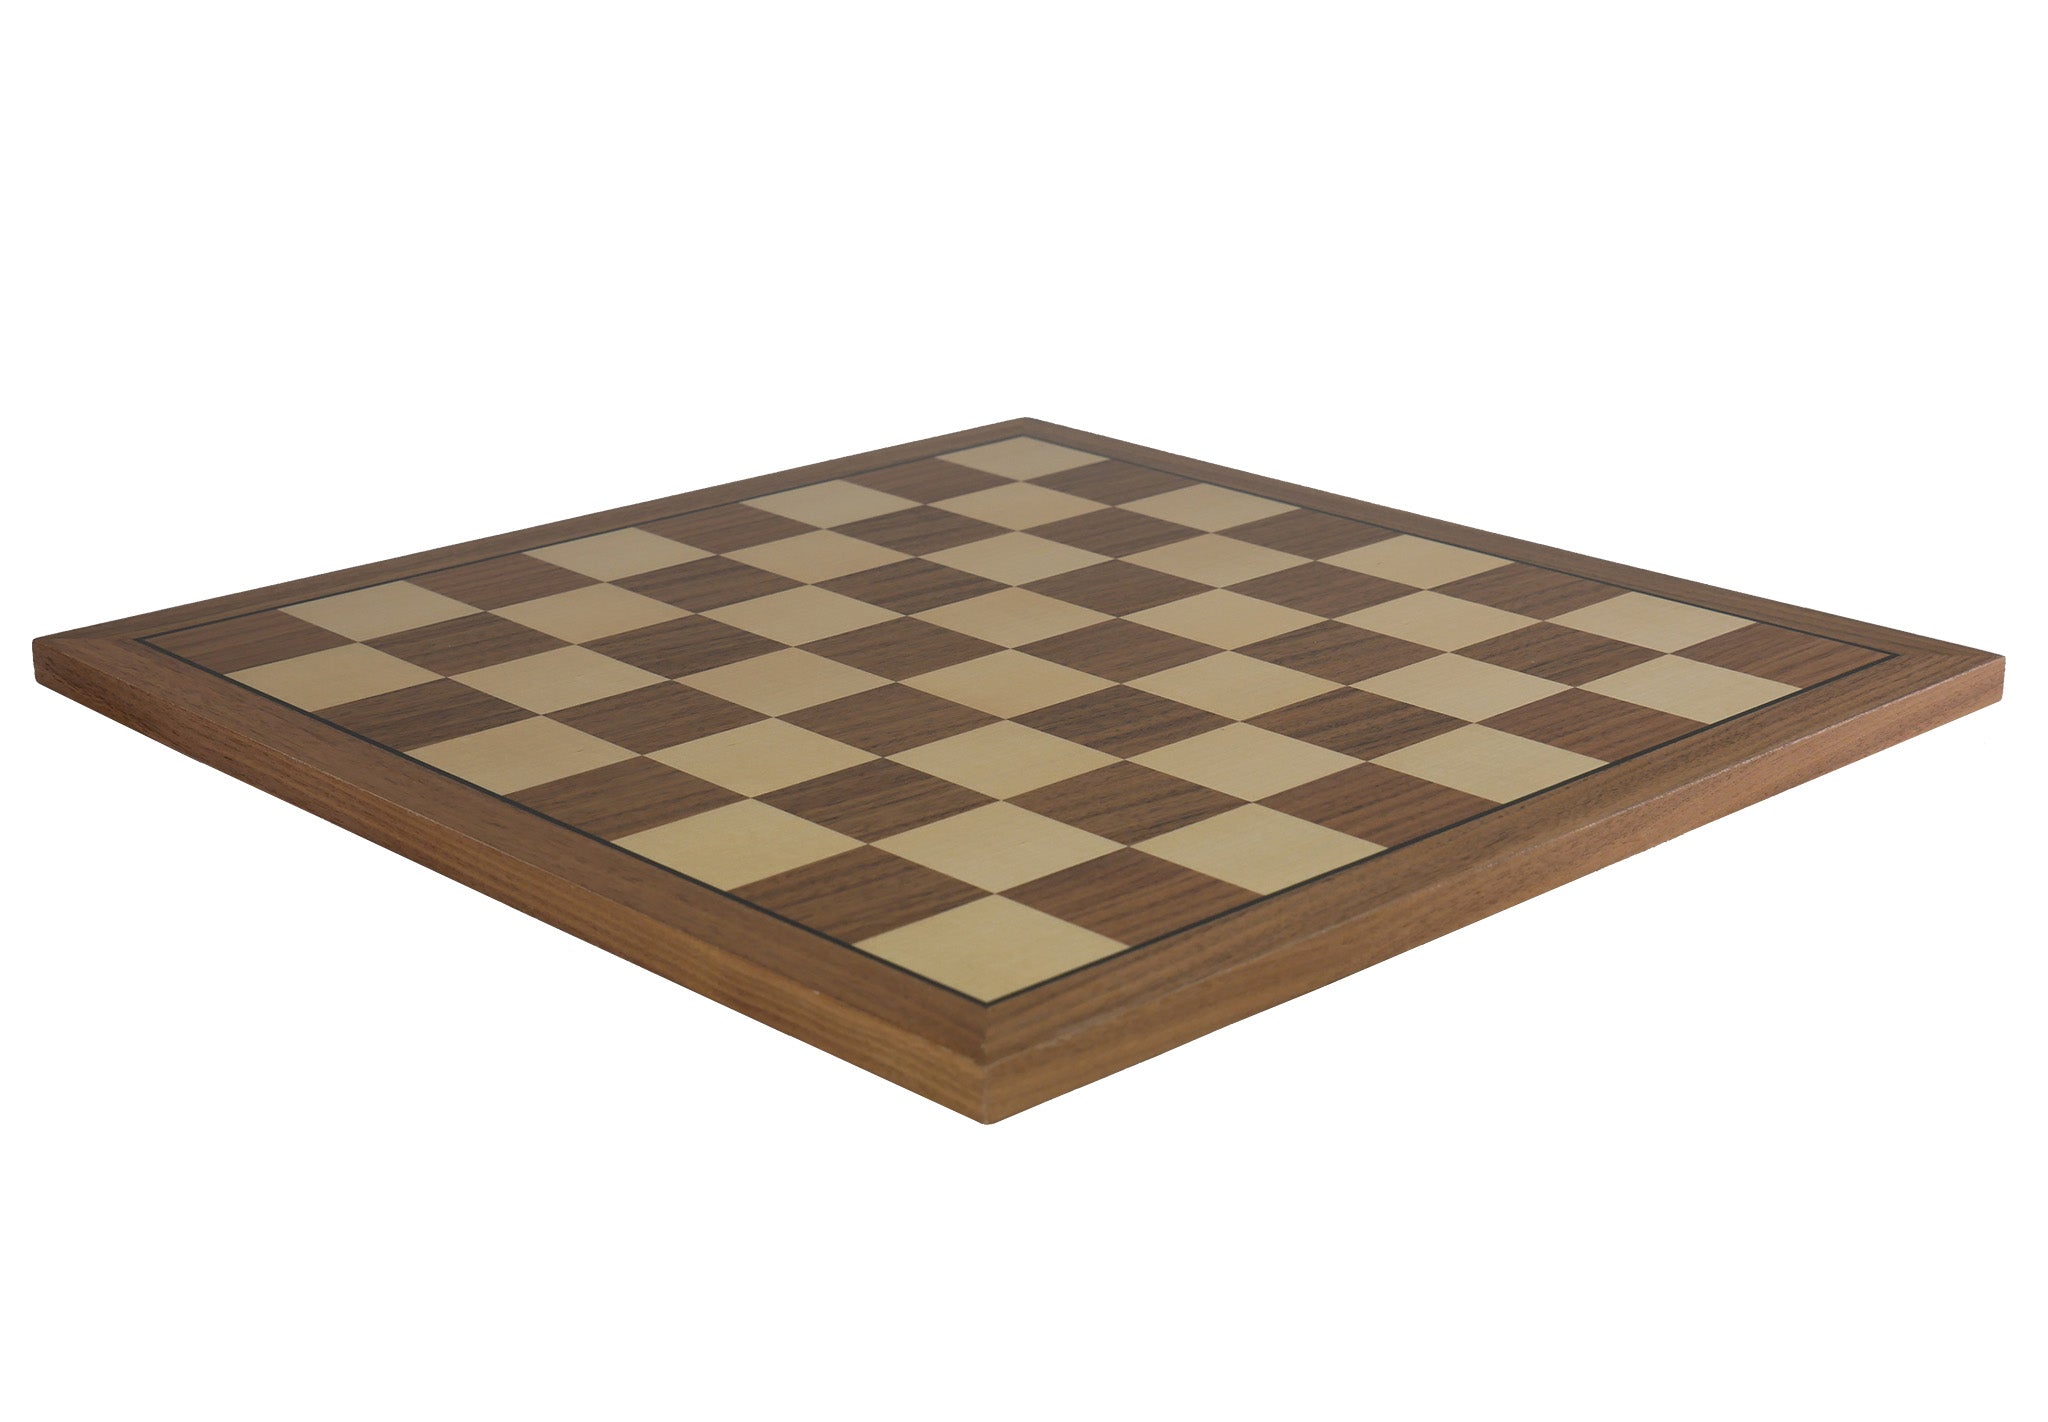 Chess Board - Walnut & Maple Veneer, Five Sizes from 12" to 20"